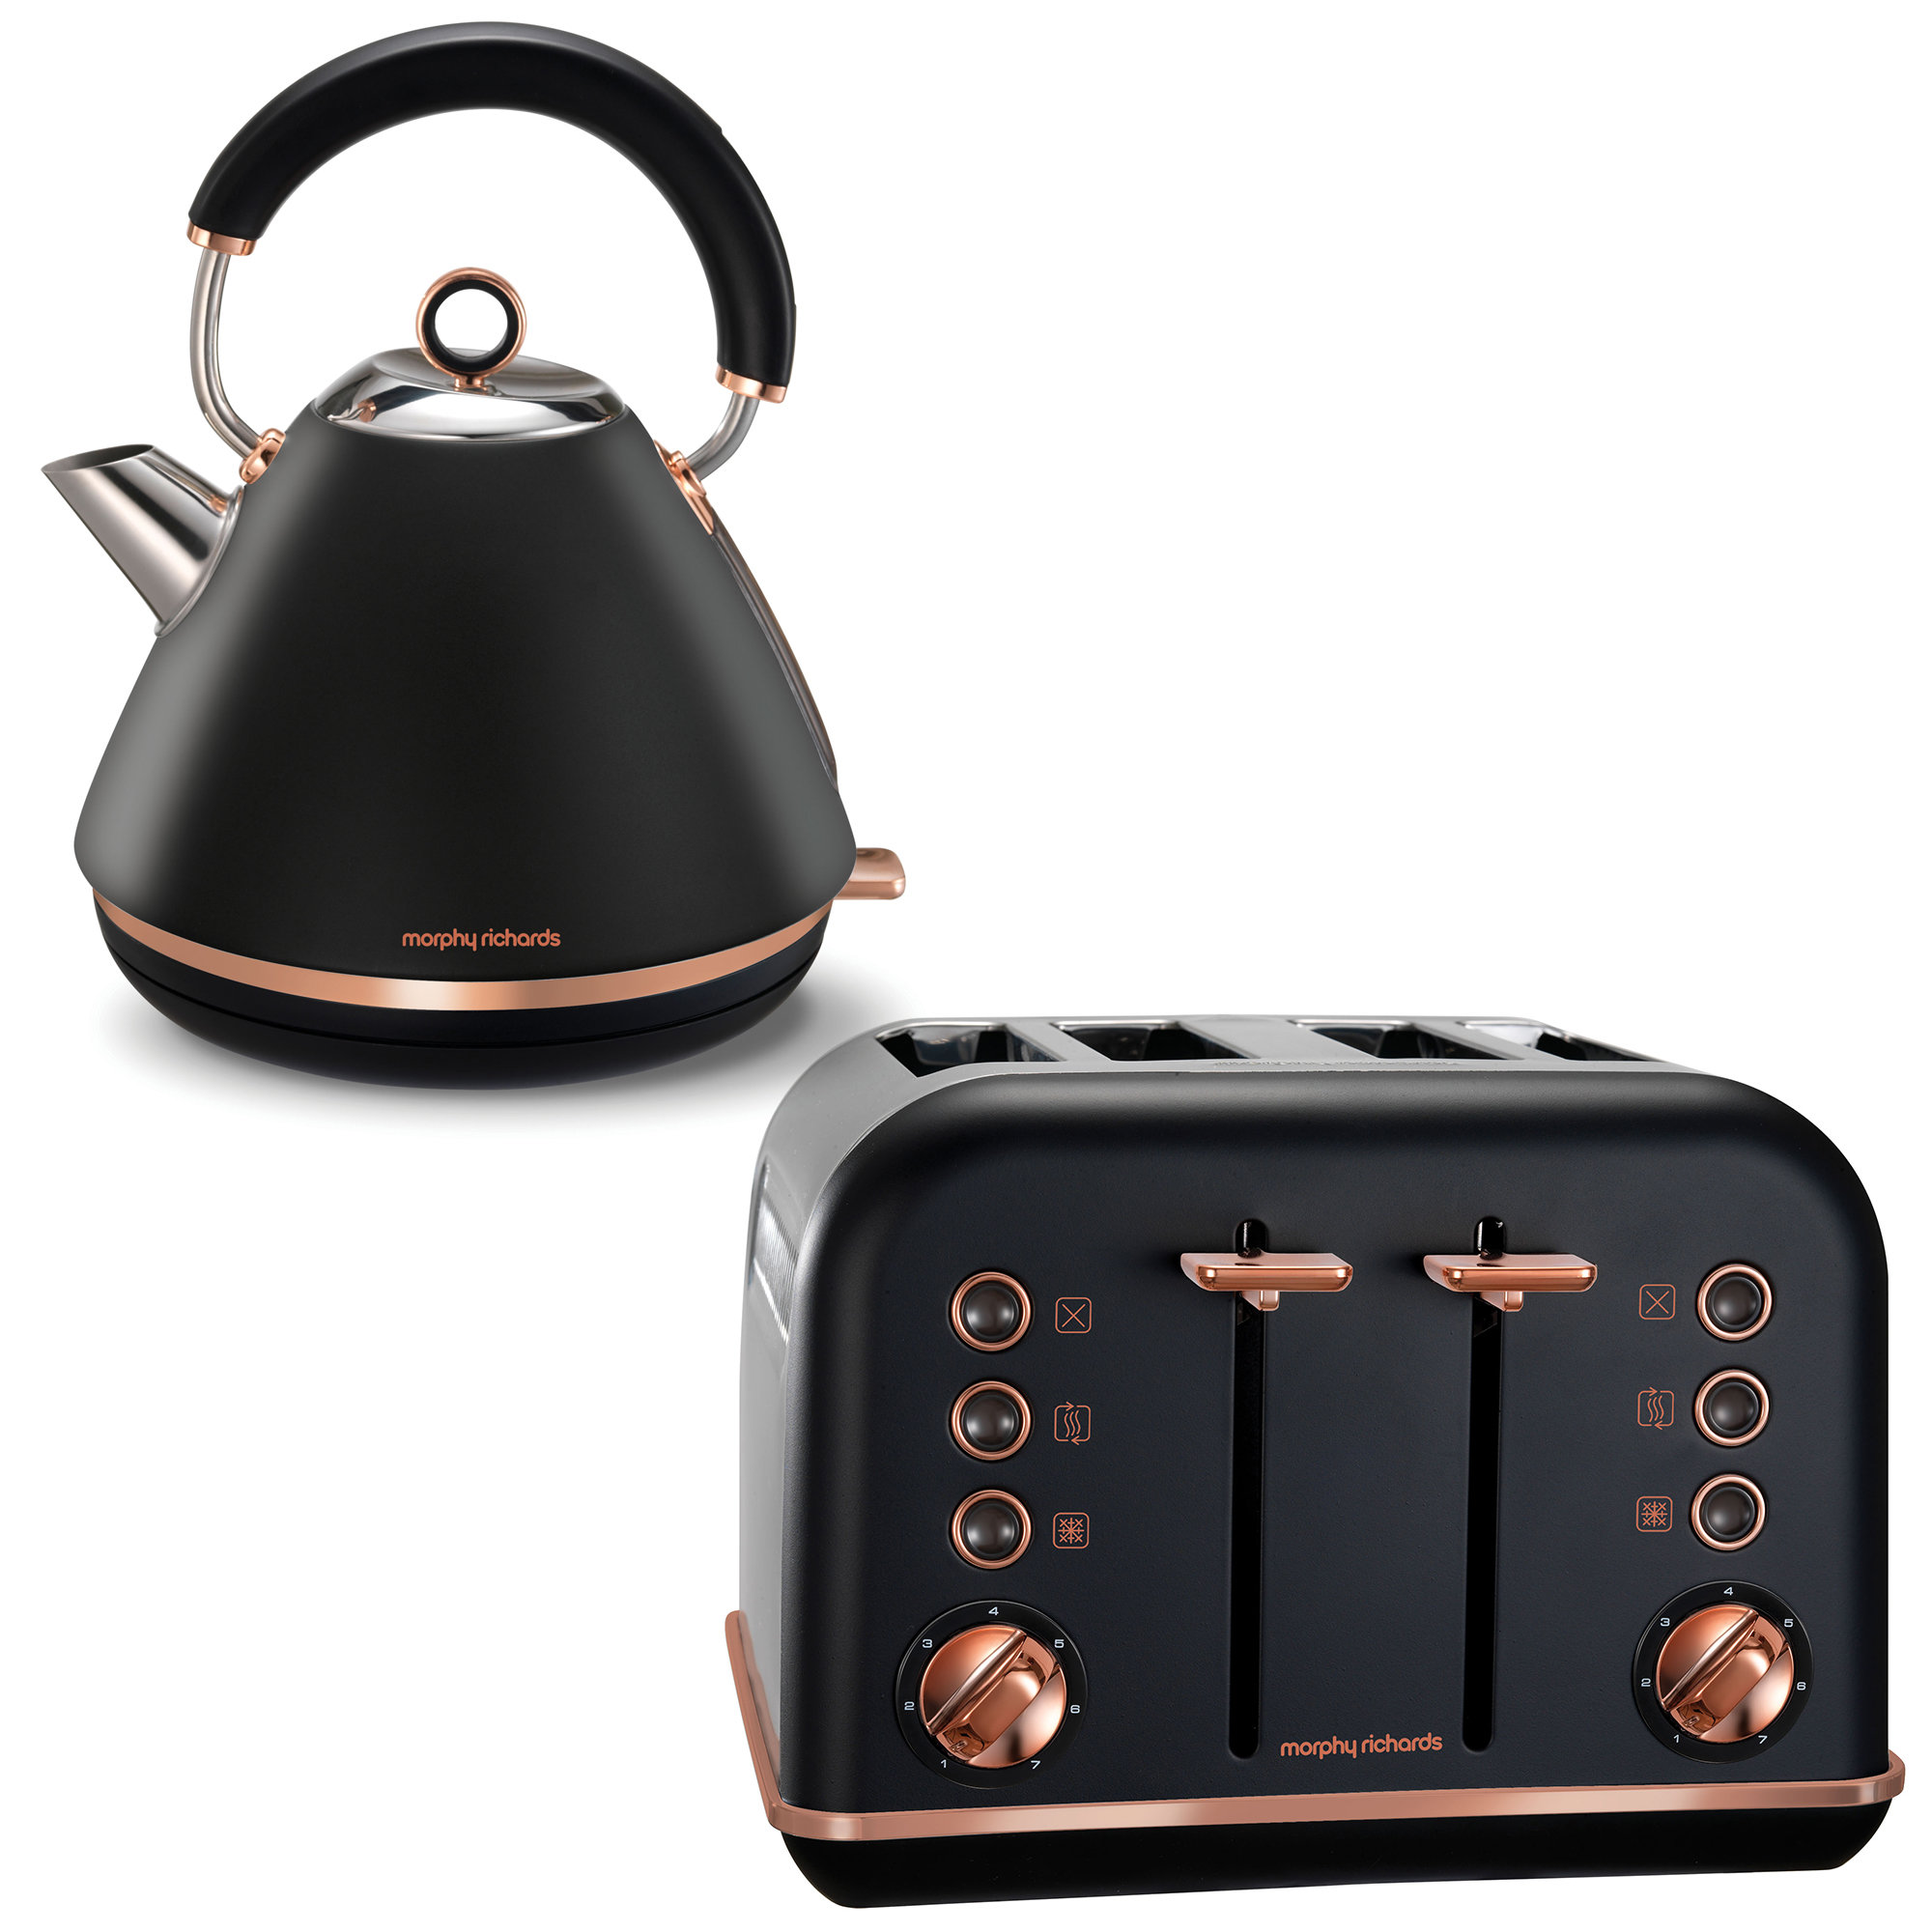 Morphy Richards Black Accents Rose Gold 1.5L Pyramid Kettle and 4 Slice Toaster 